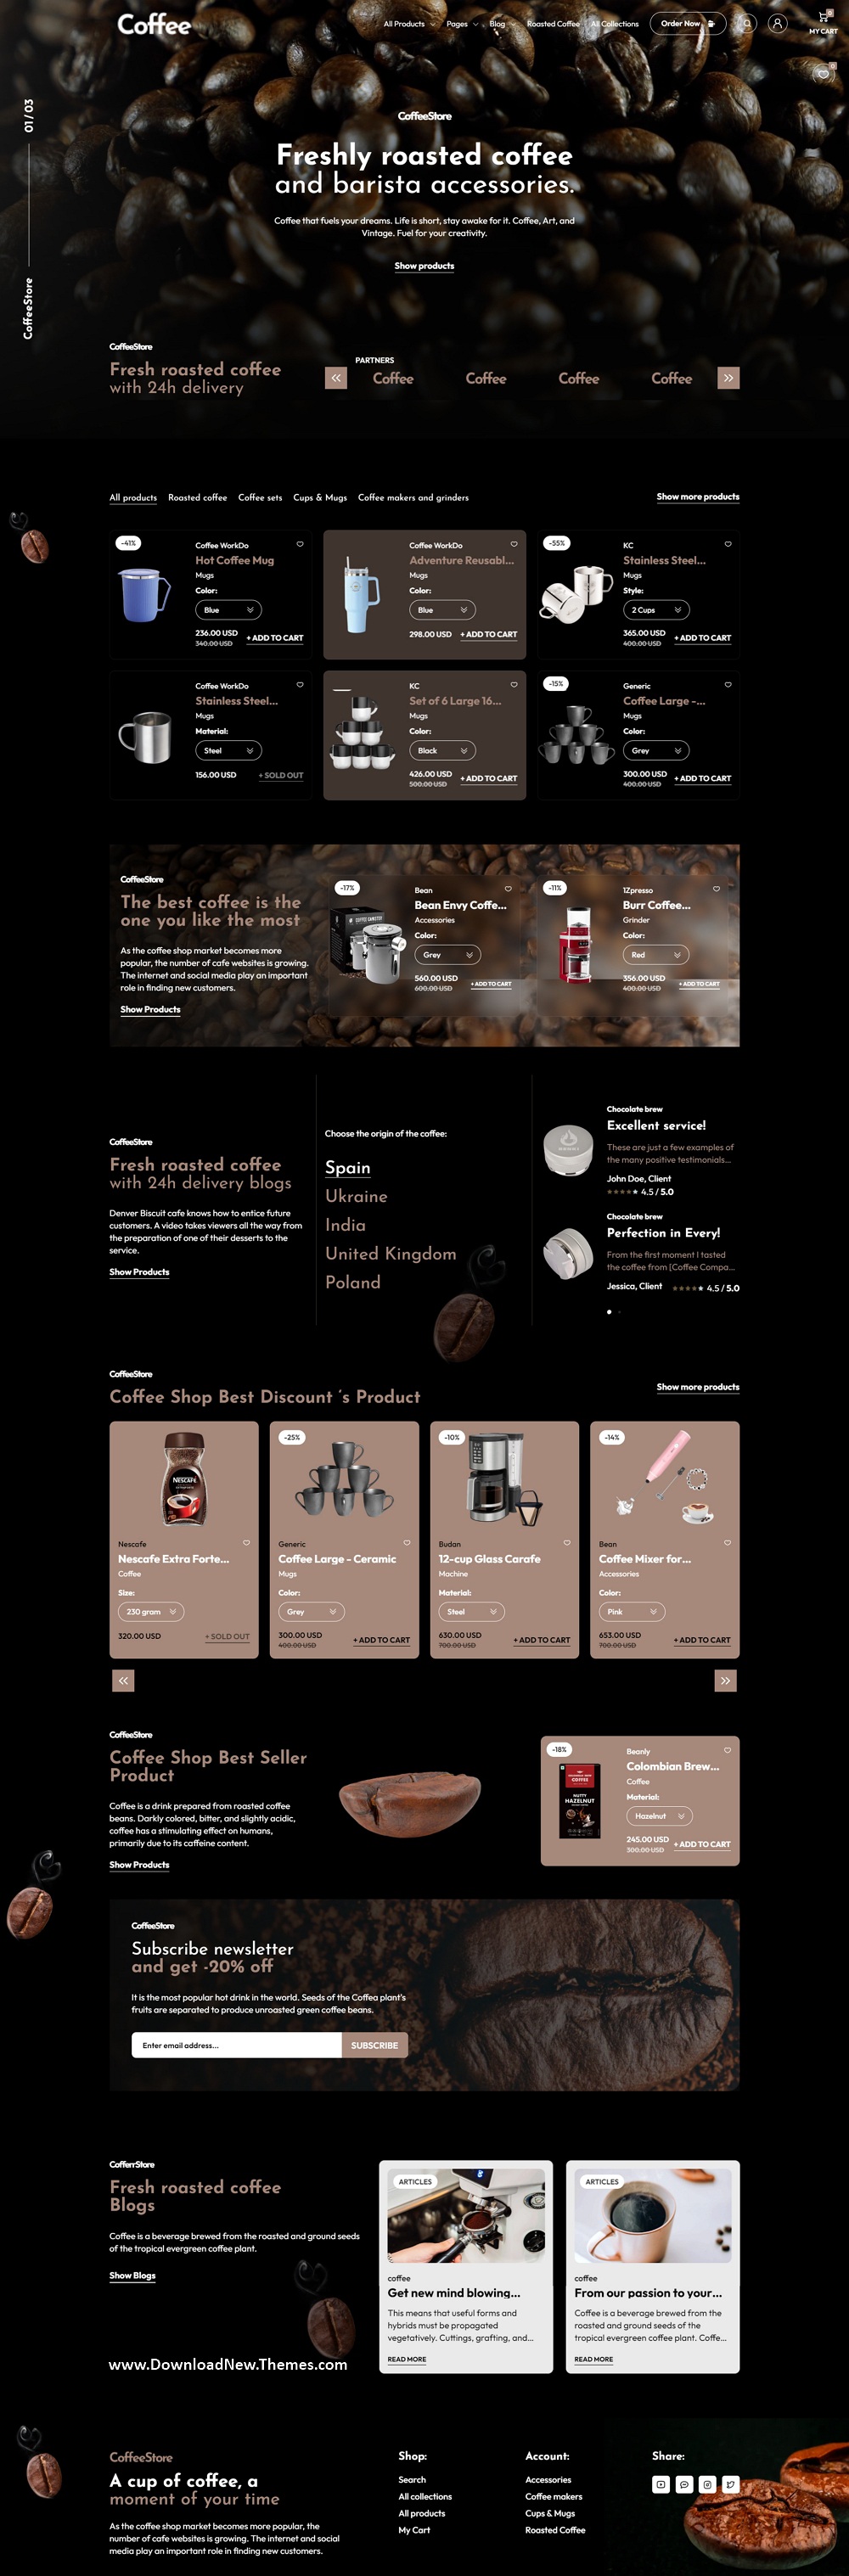 Coffee - Shopify 2.0 eCommerce Theme Review